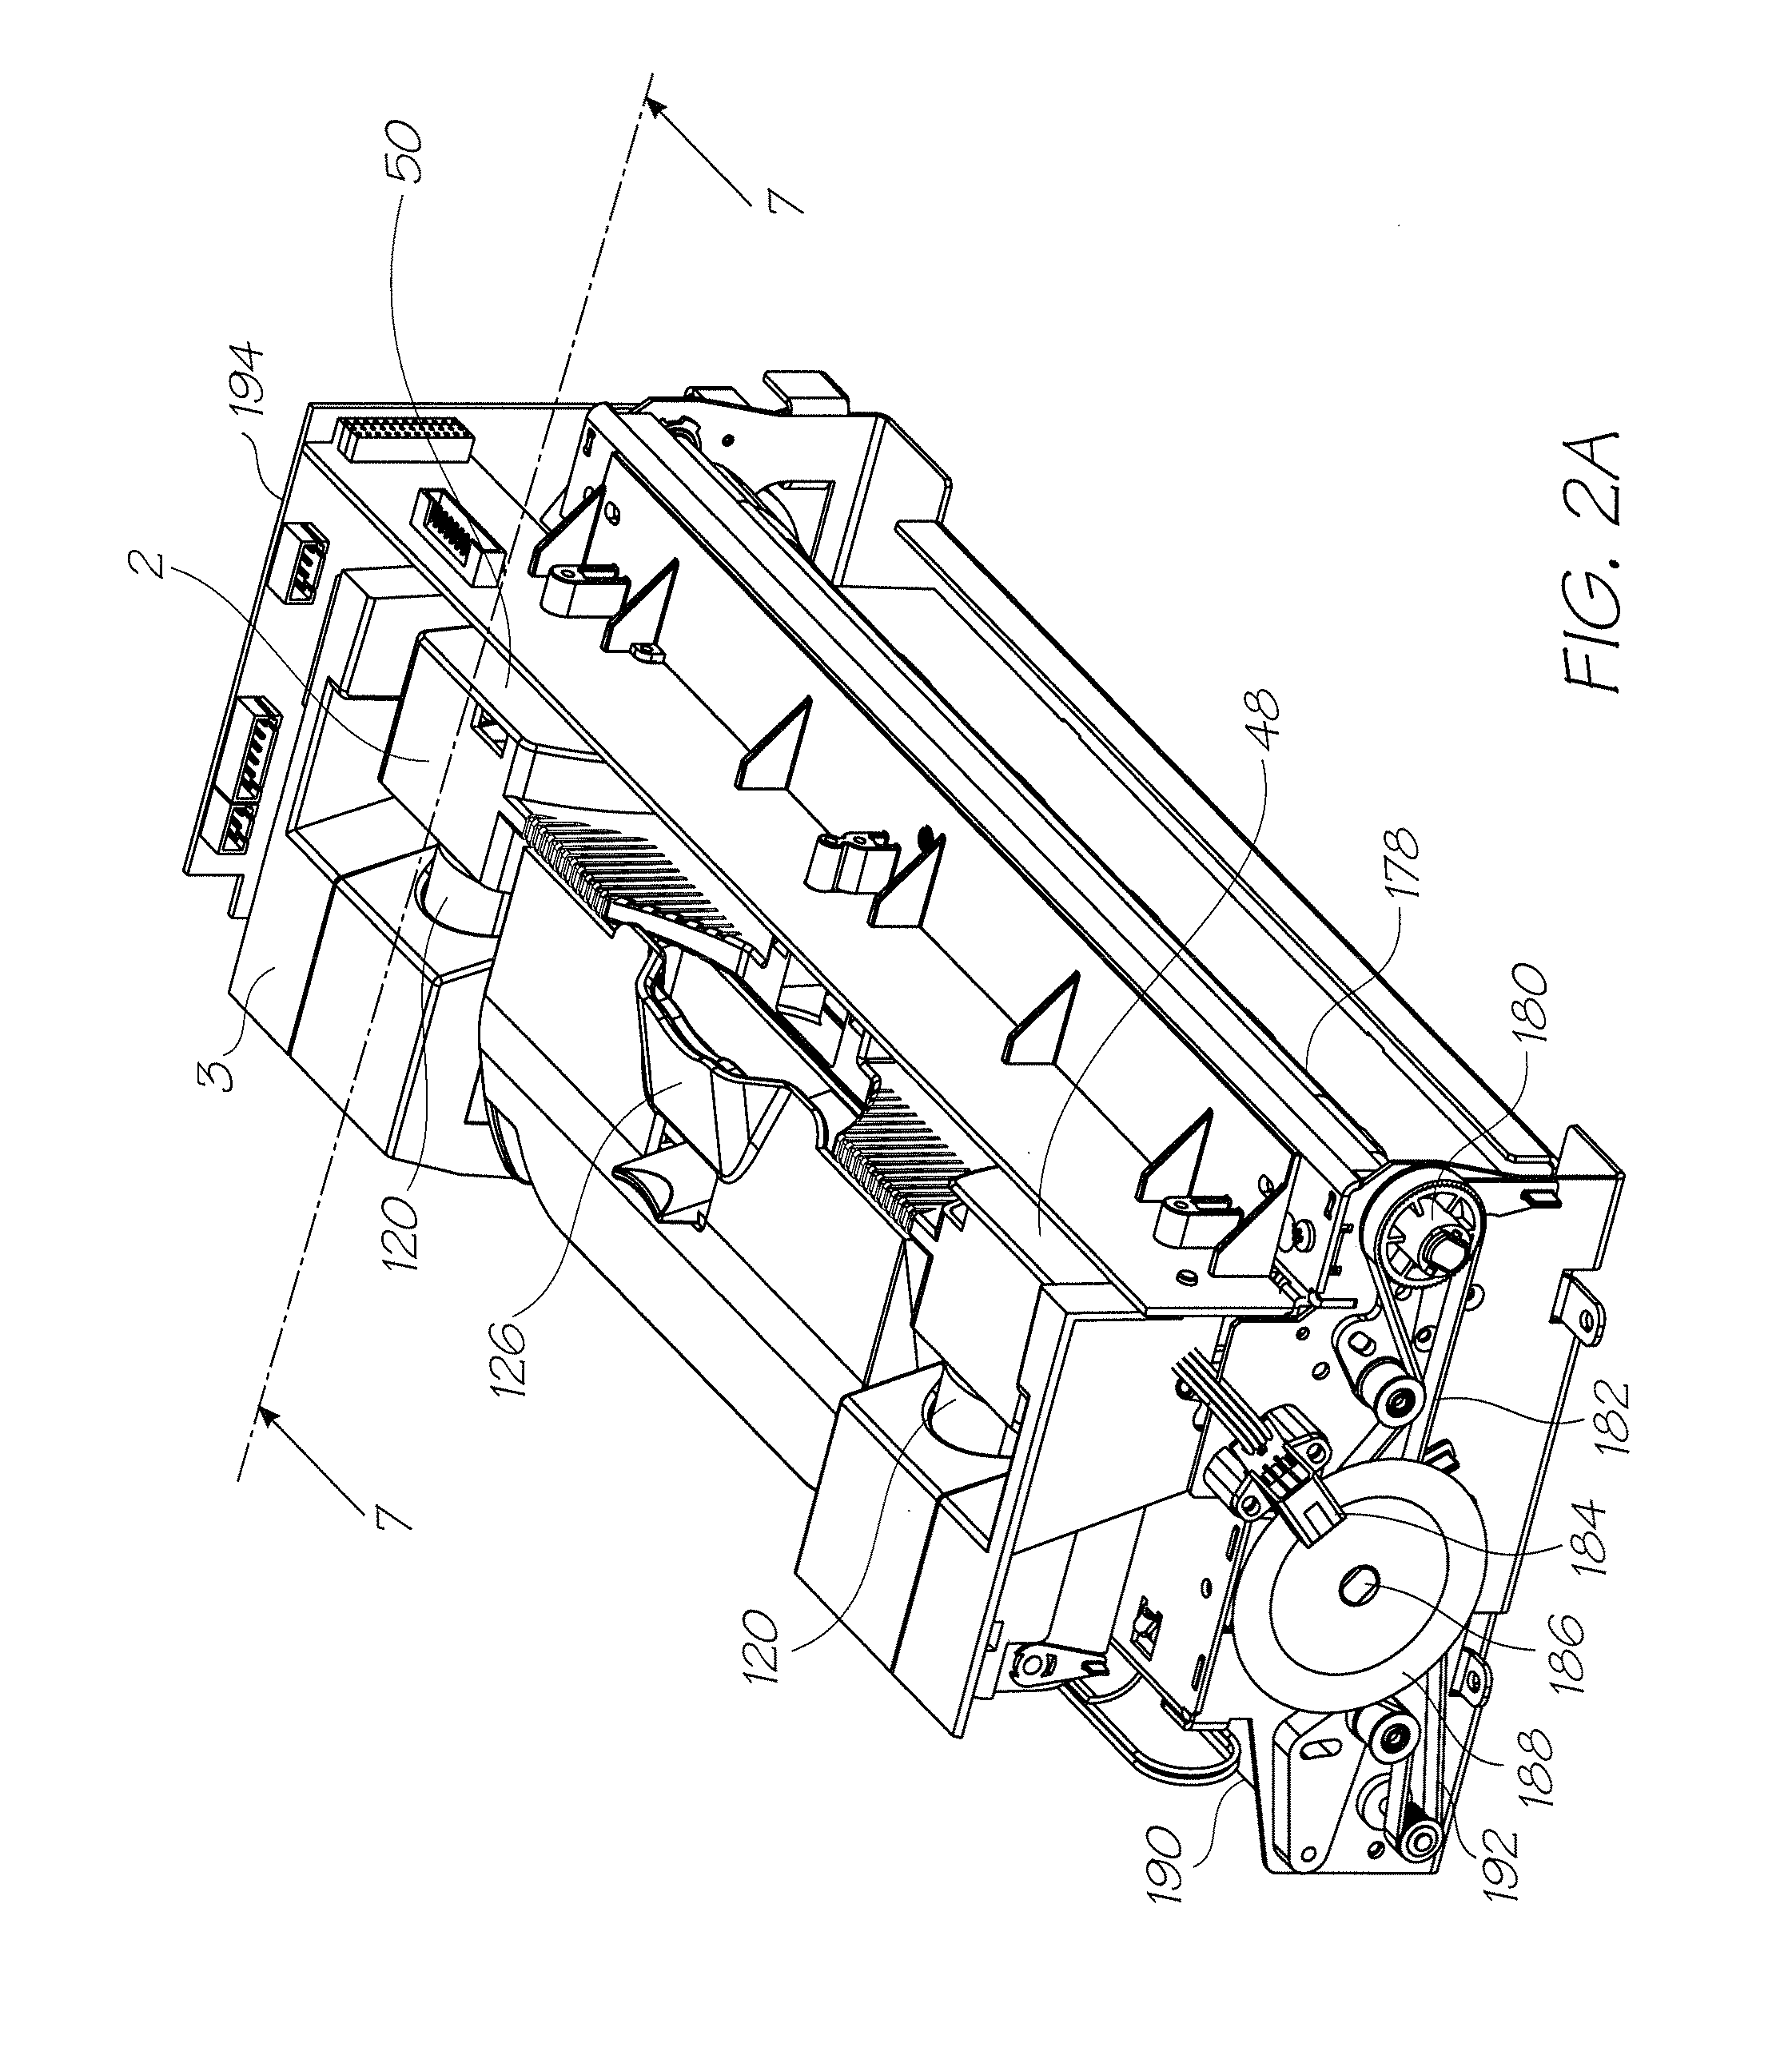 Printhead maintenance facility with nozzle wiper movable parallel to media feed direction